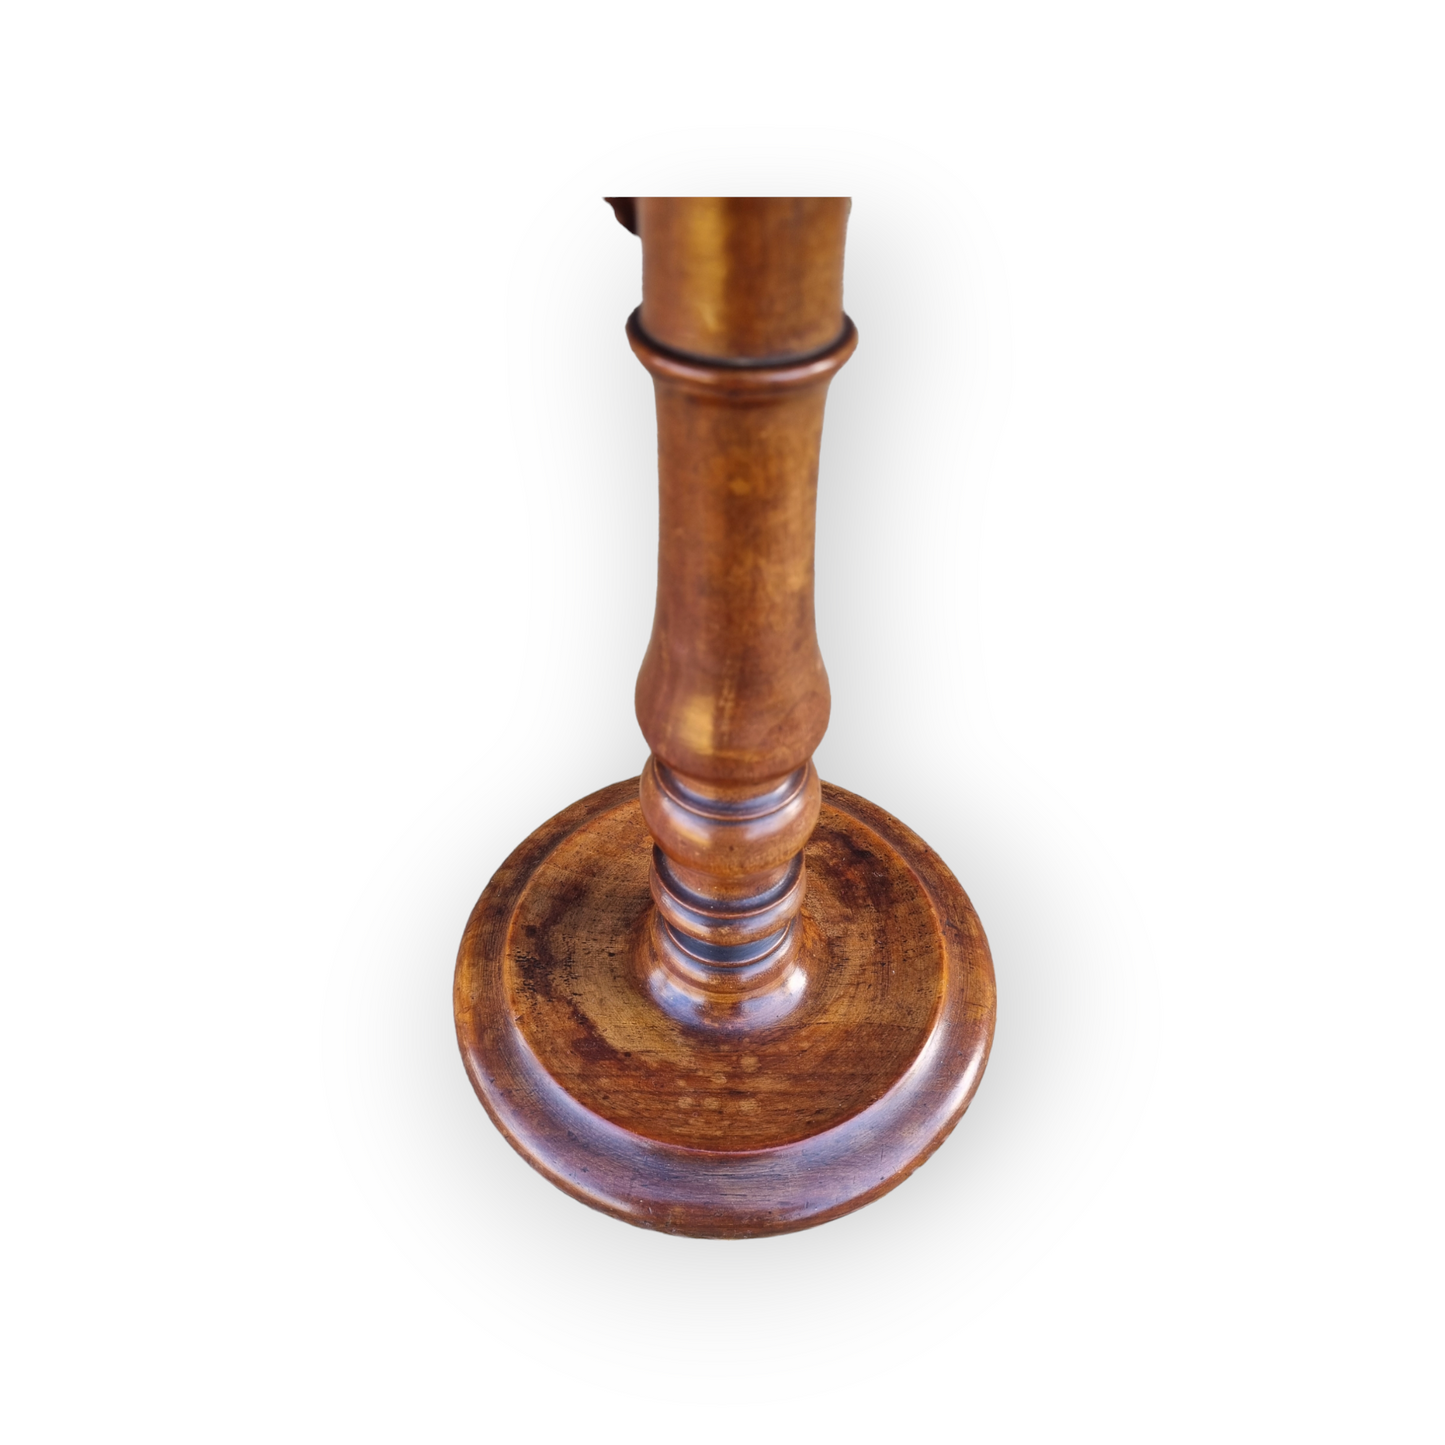 19th Century English Antique Treen Rise-and-Fall Candlestand